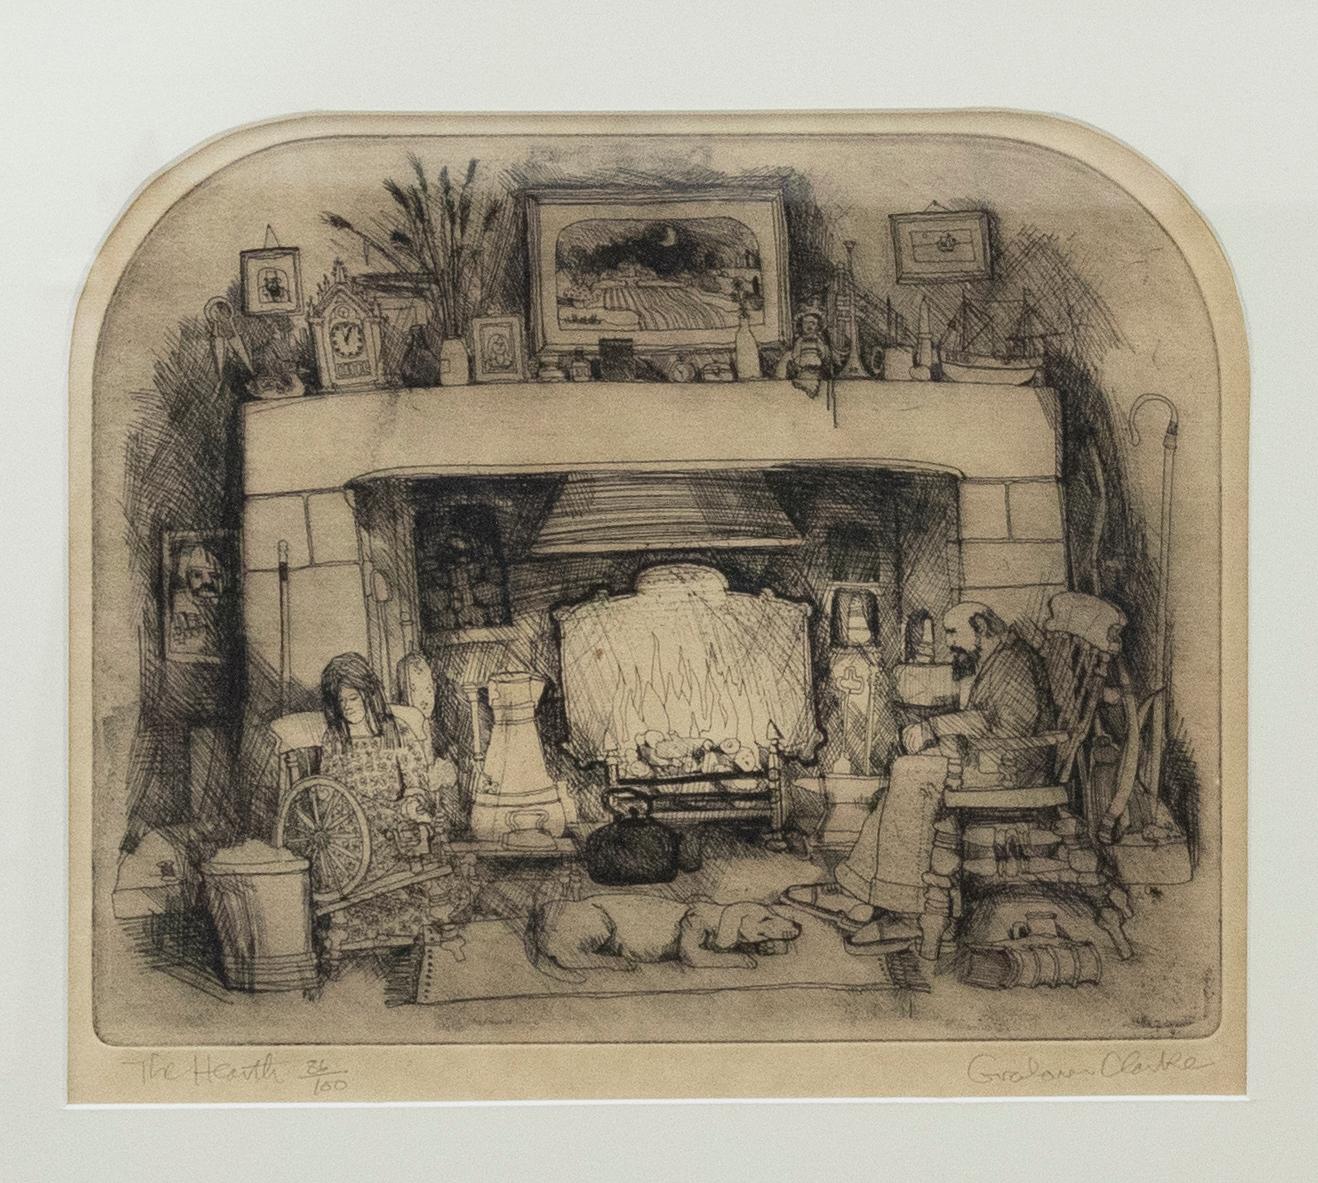 Graham Clarke (b.1941) - Framed 20th Century Etching, The Hearth - Print by Unknown